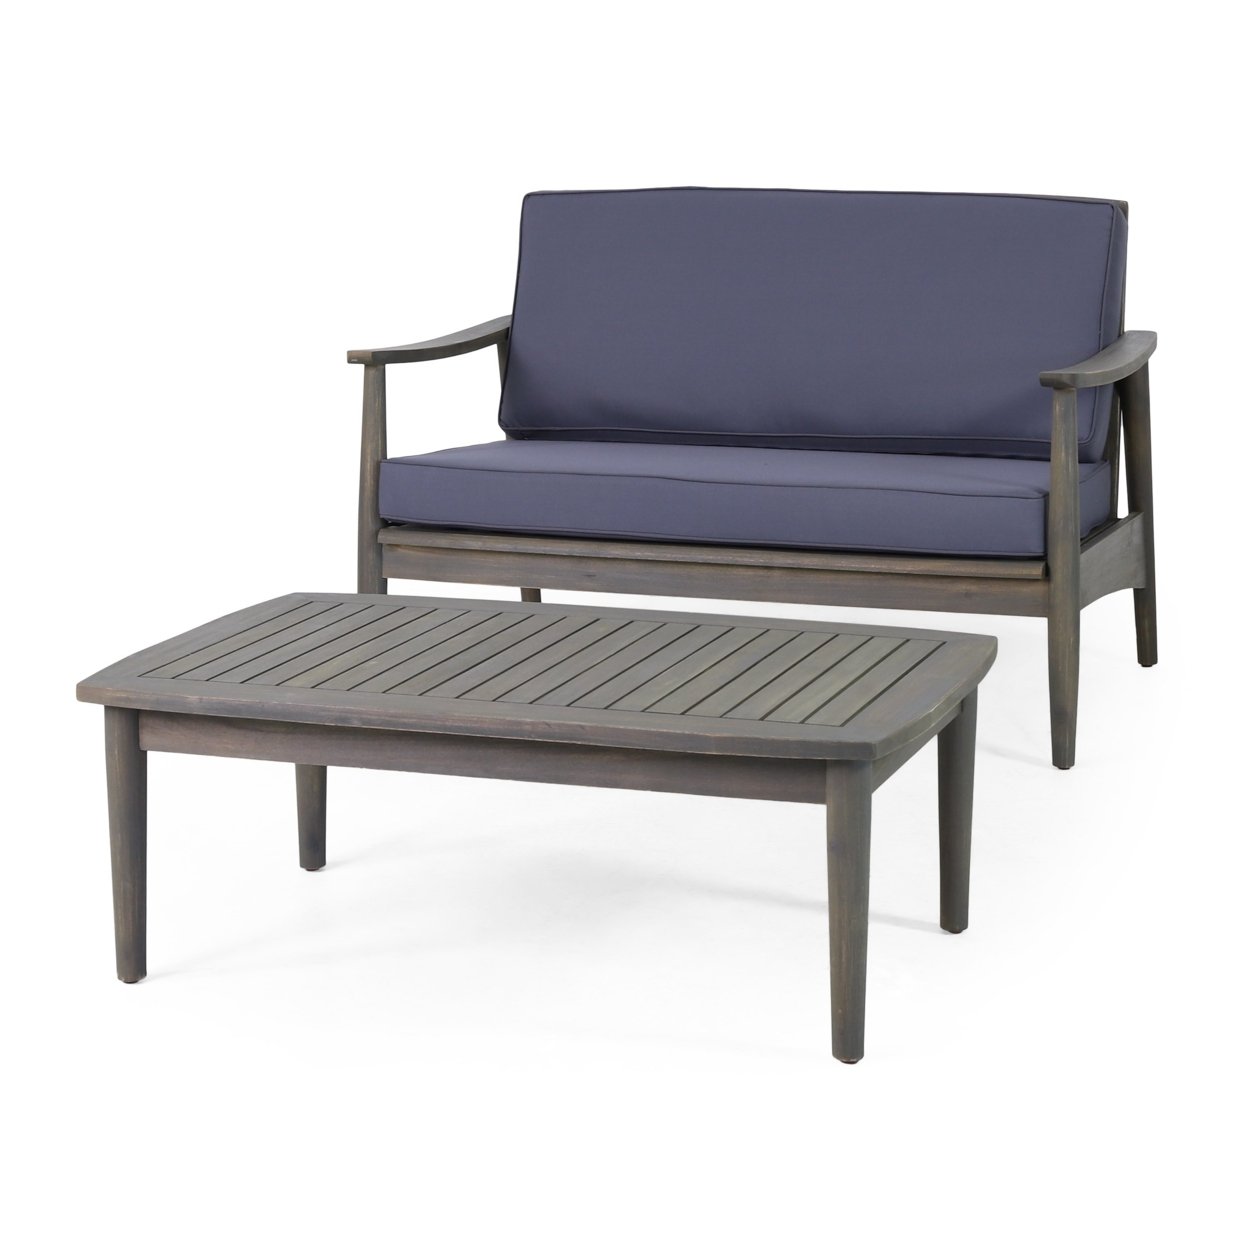 Emmry Outdoor Acacia Wood Loveseat Set With Coffee Table - Gray/dark Gray